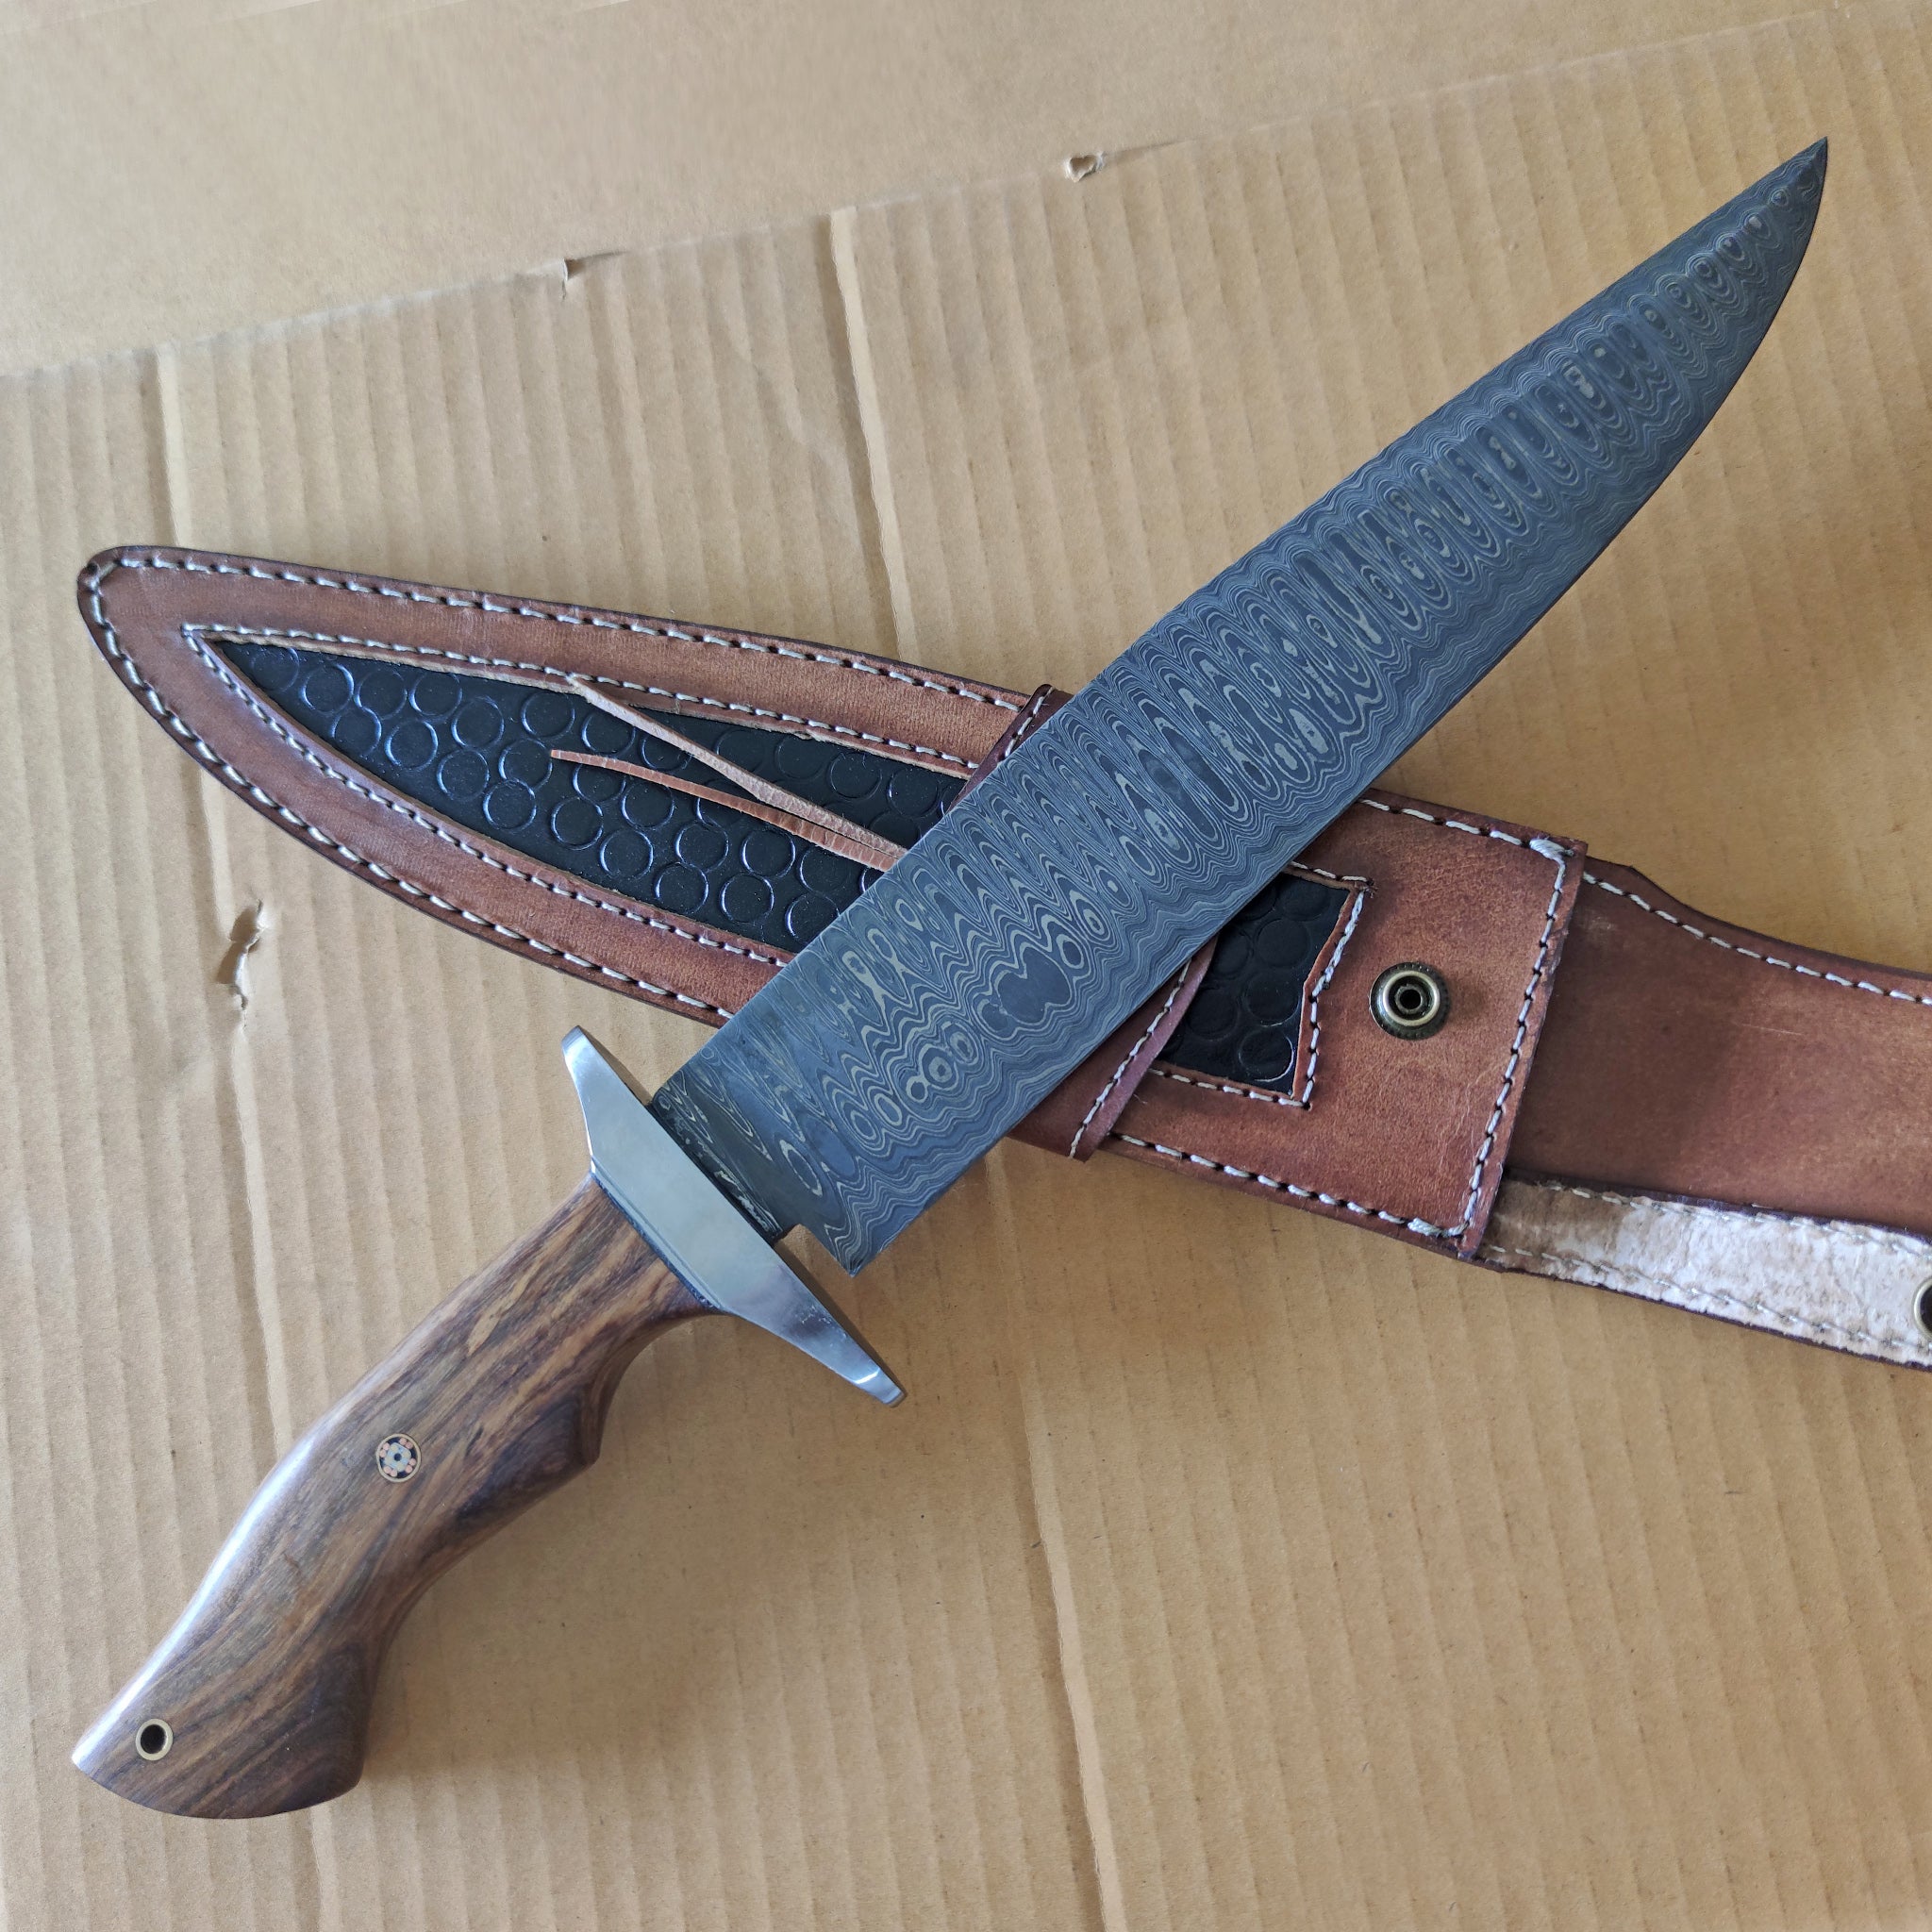 Damascus Steel Store - Sharpest Knives at Slashed Prices